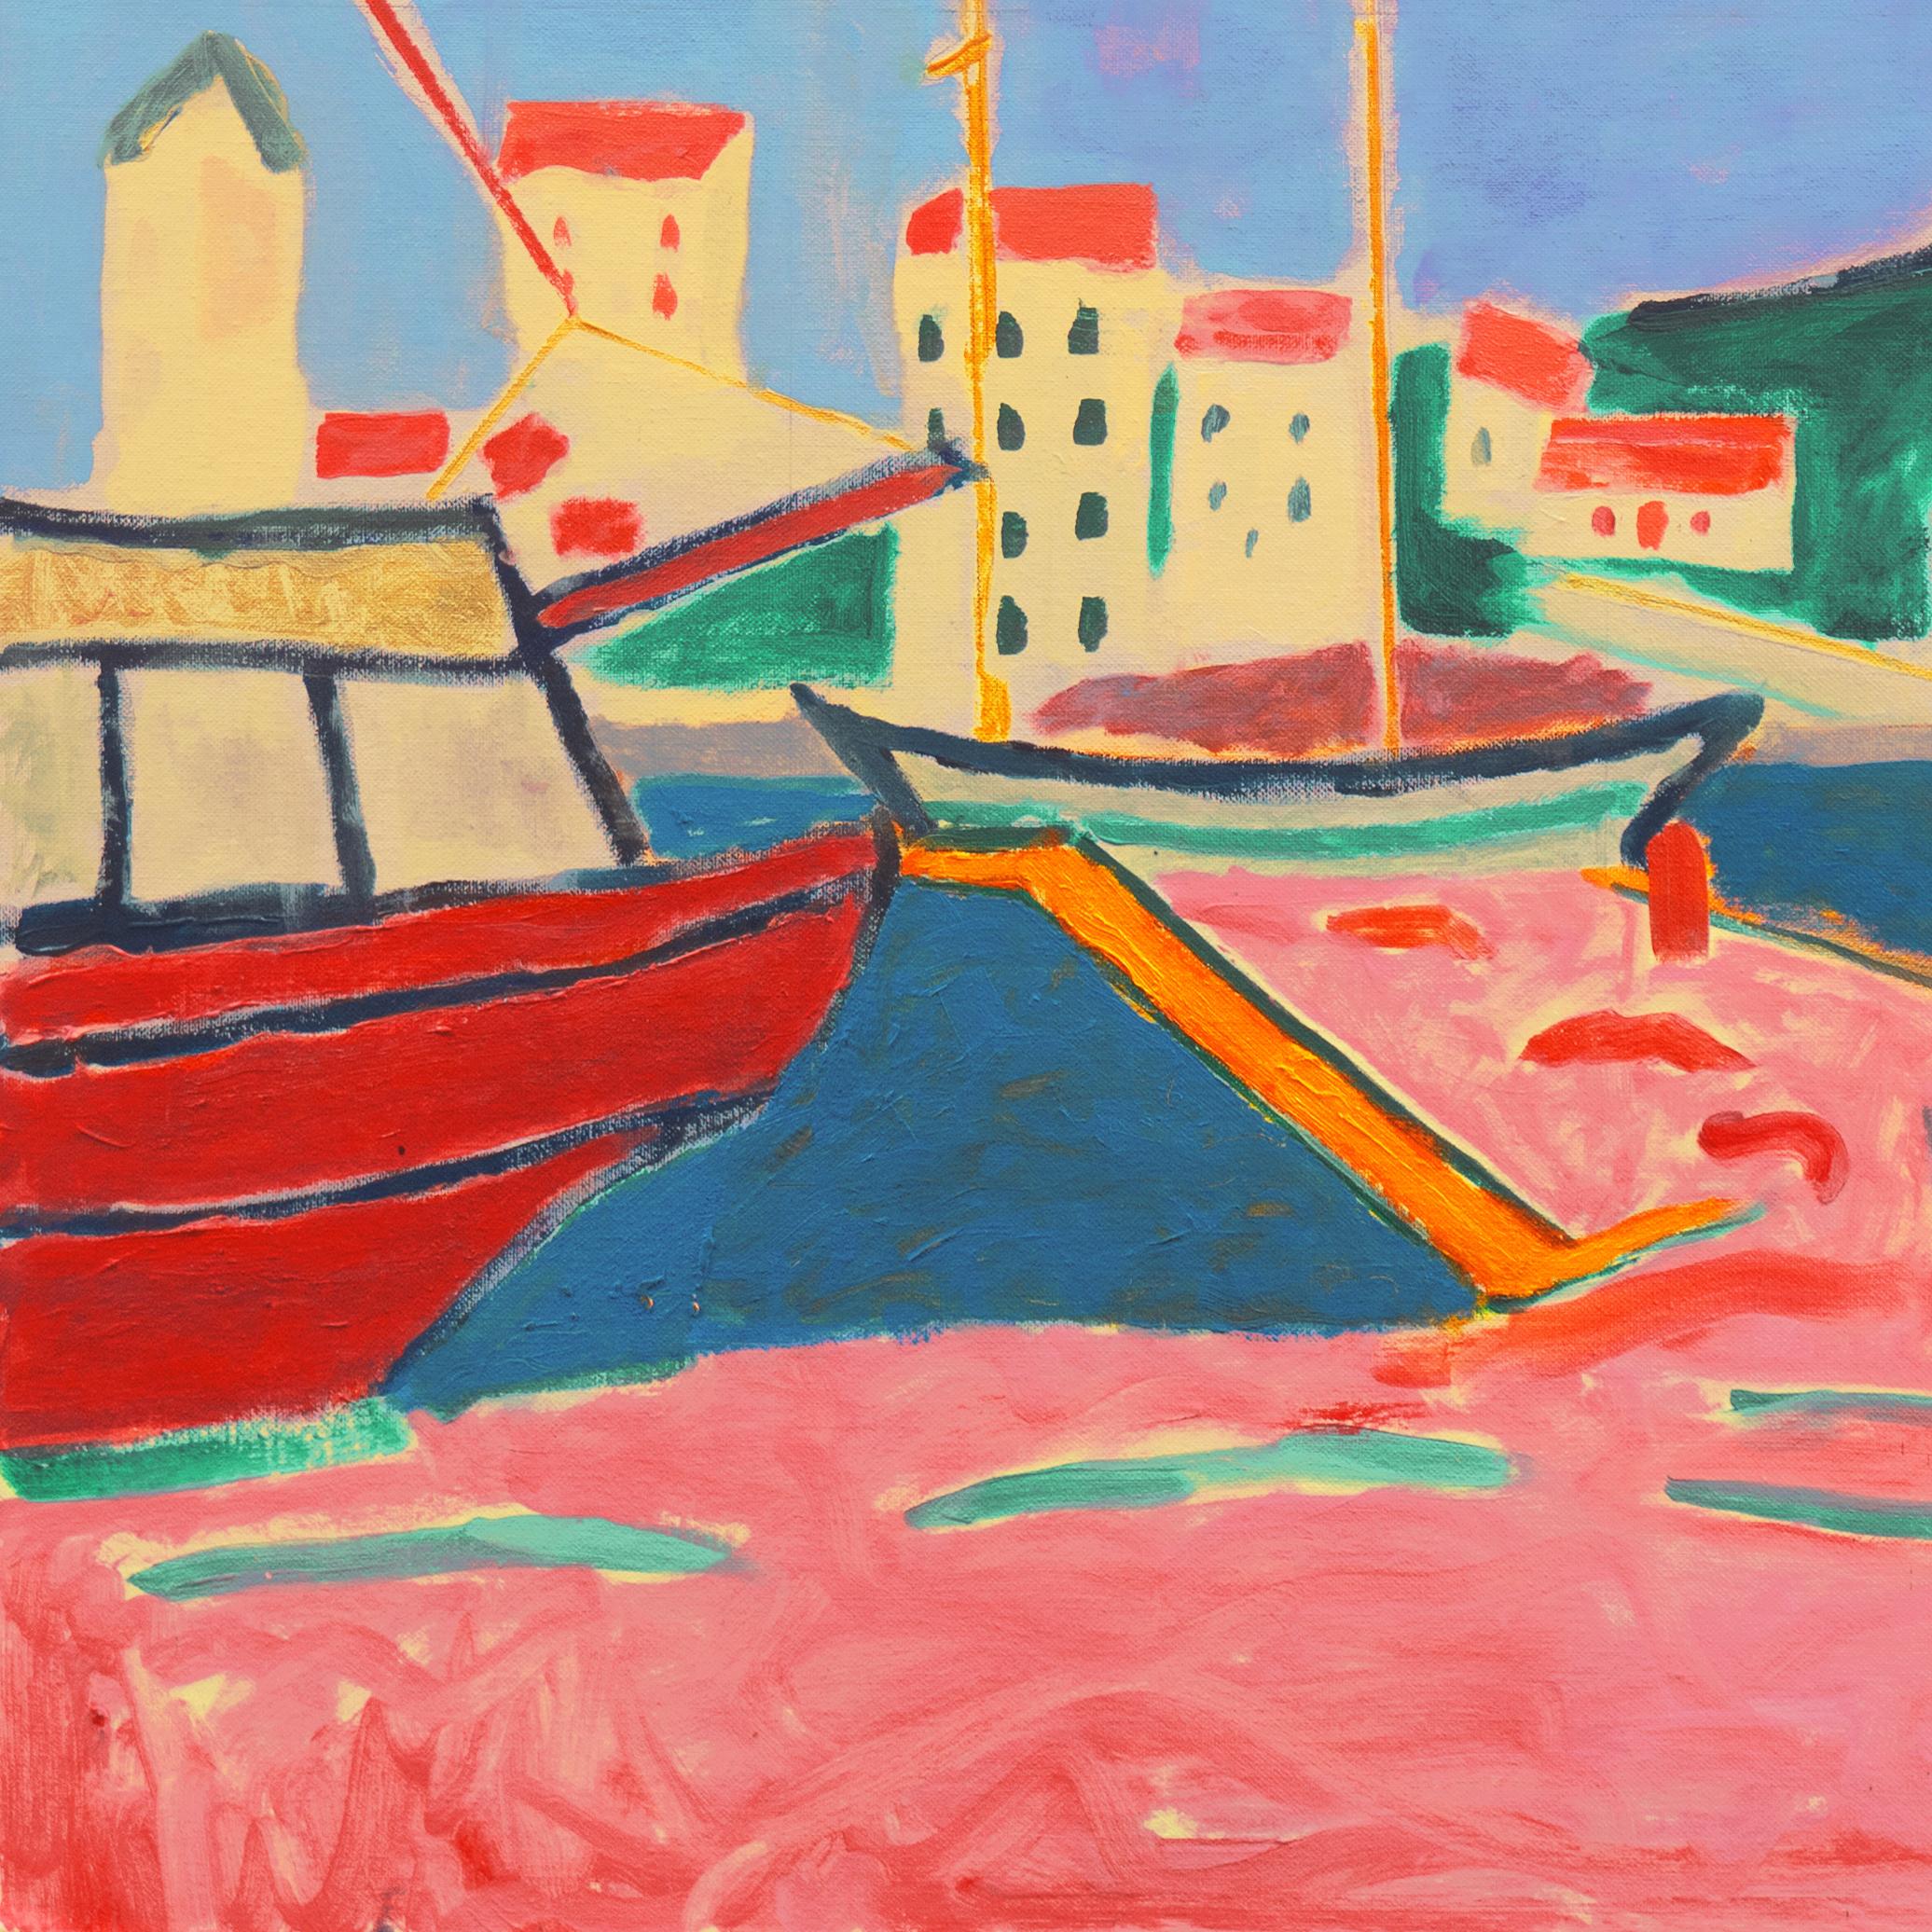 Signed verso, 'Ant McNaught', (American, born 1952), inscribed '(After Derain, 1905)', with number and limitation, '1/375', titled 'Port de Vendres' and dated 2020. 

A substantial, Post-Impressionist view of the port of Vendres in the South of